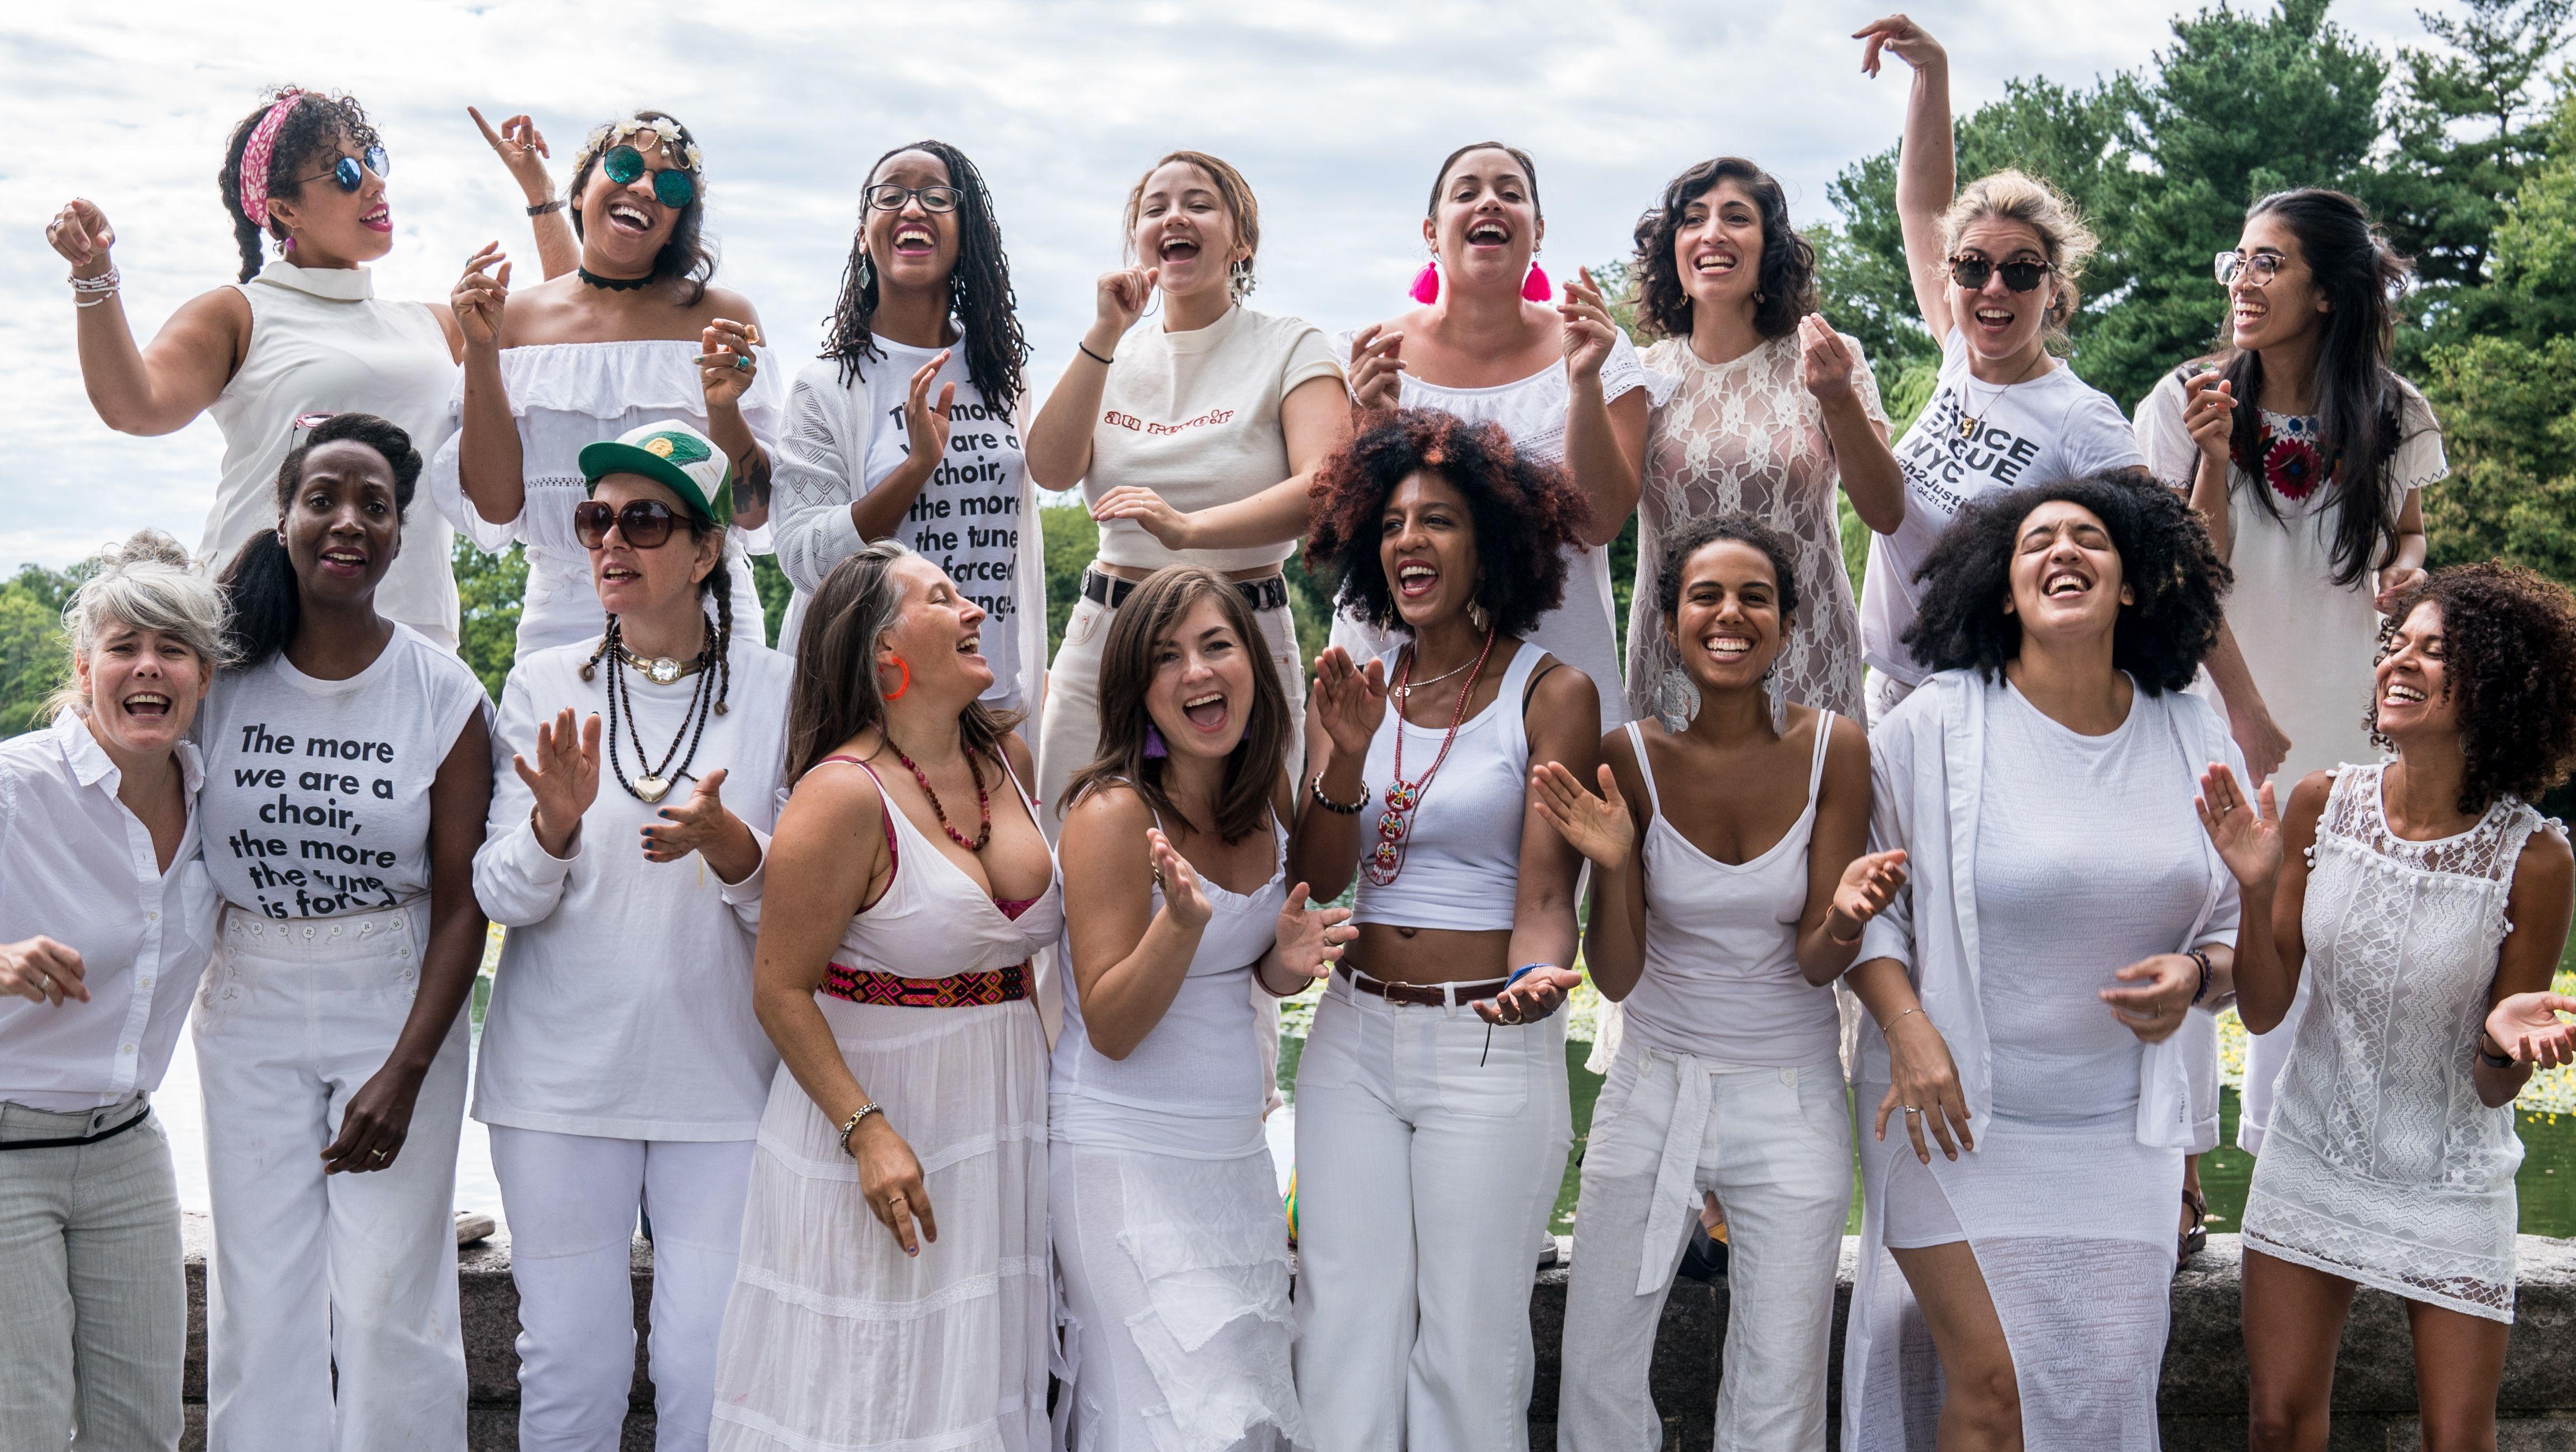 The Resistance Revival Chorus (RRC) is a collective of more than 60 women and non-binary singers who join together to breathe joy and song into the resistance, and to uplift and center women’s voices.